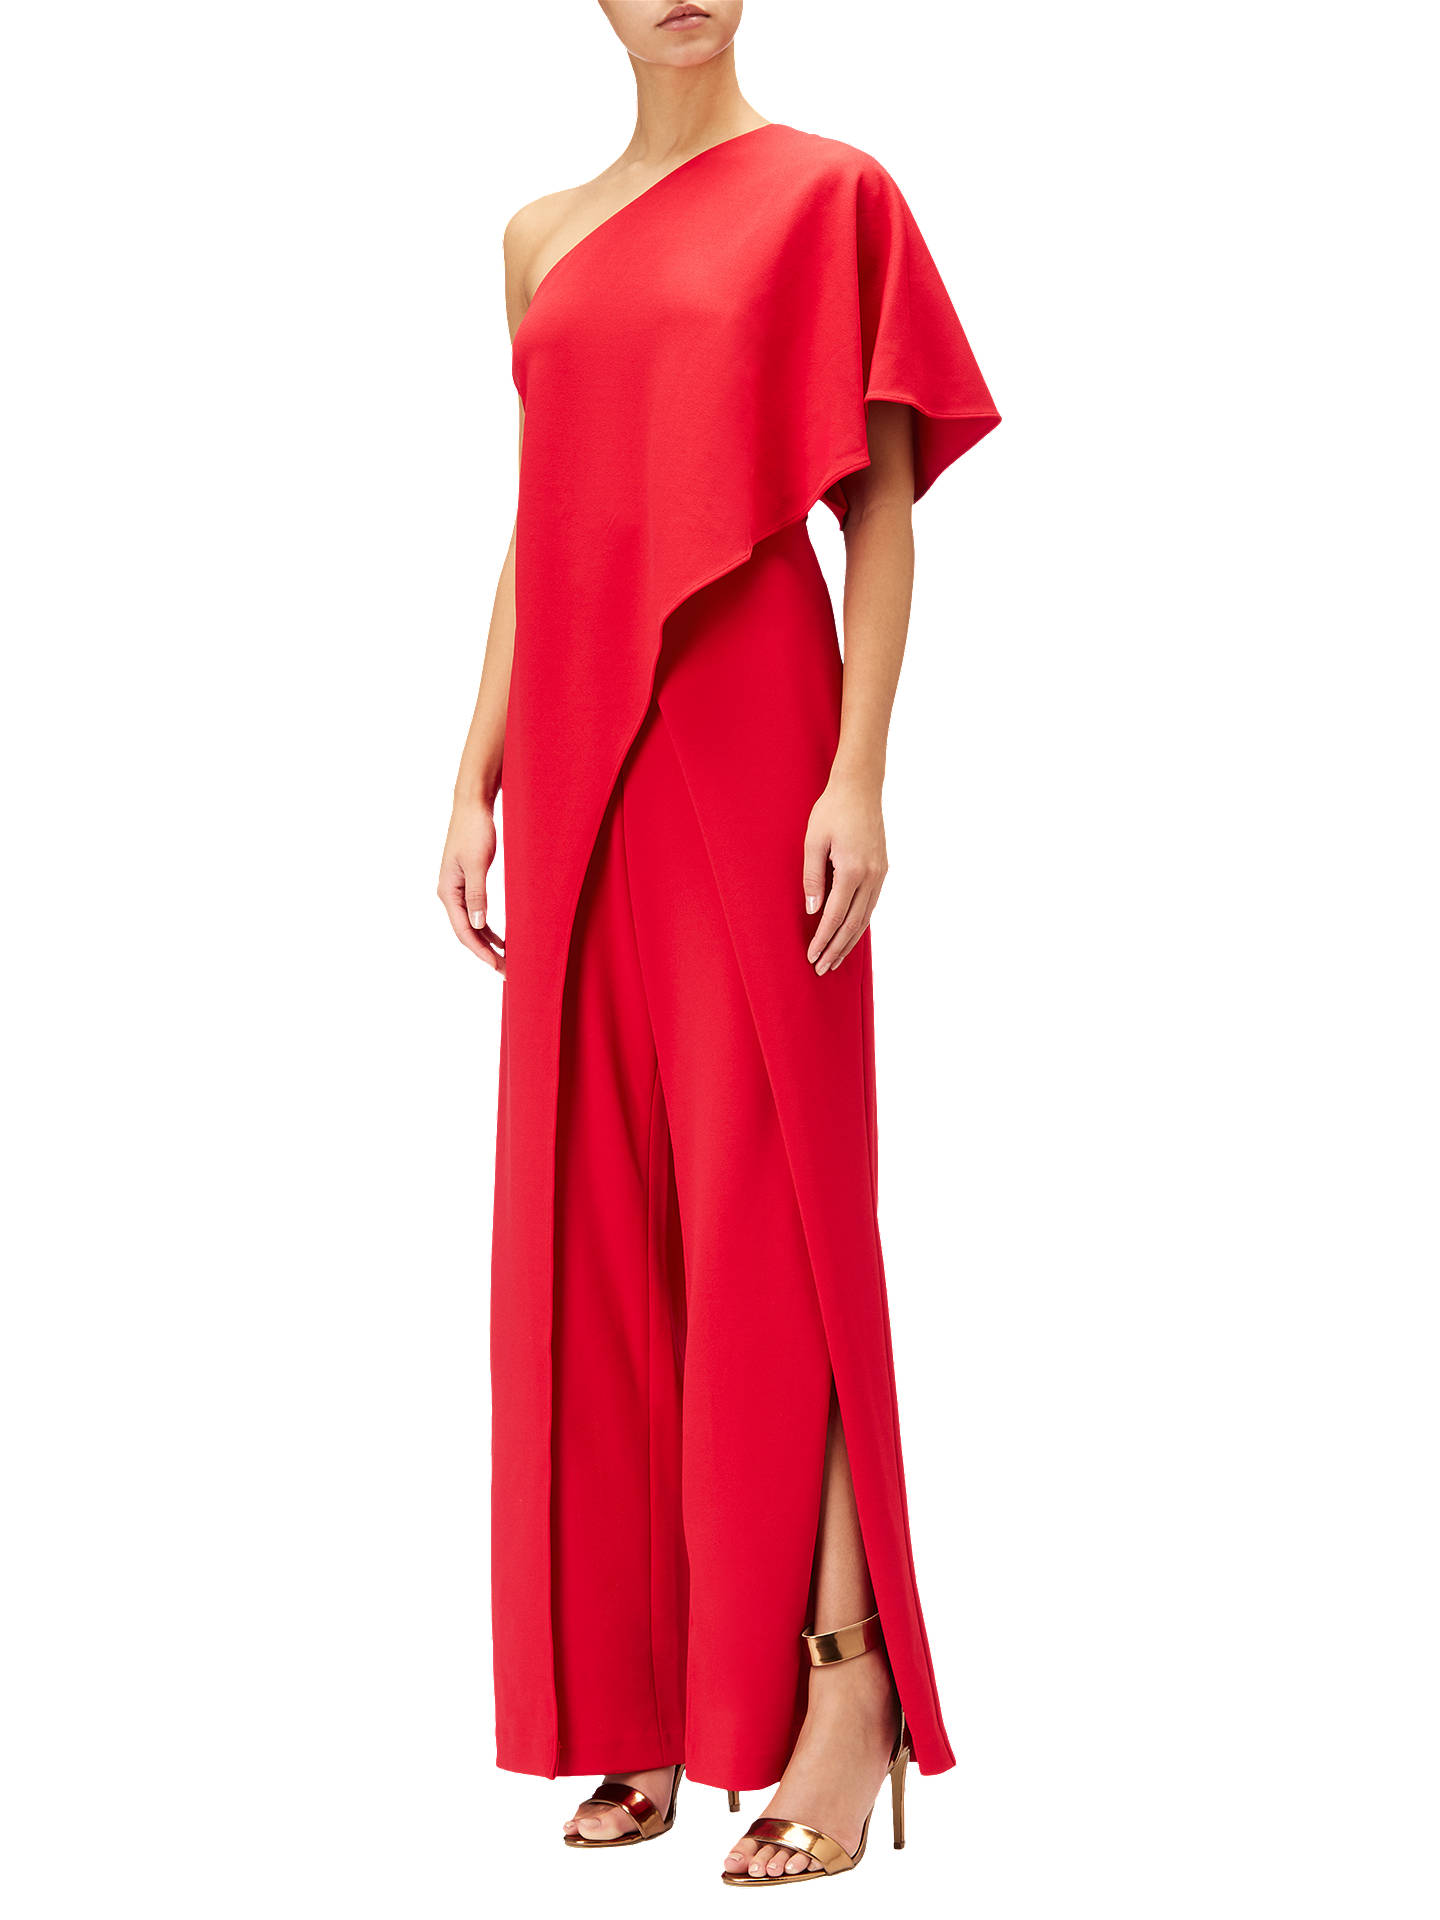 Adrianna Papell Flutter One Shoulder Jumpsuit, Red at John Lewis & Partners